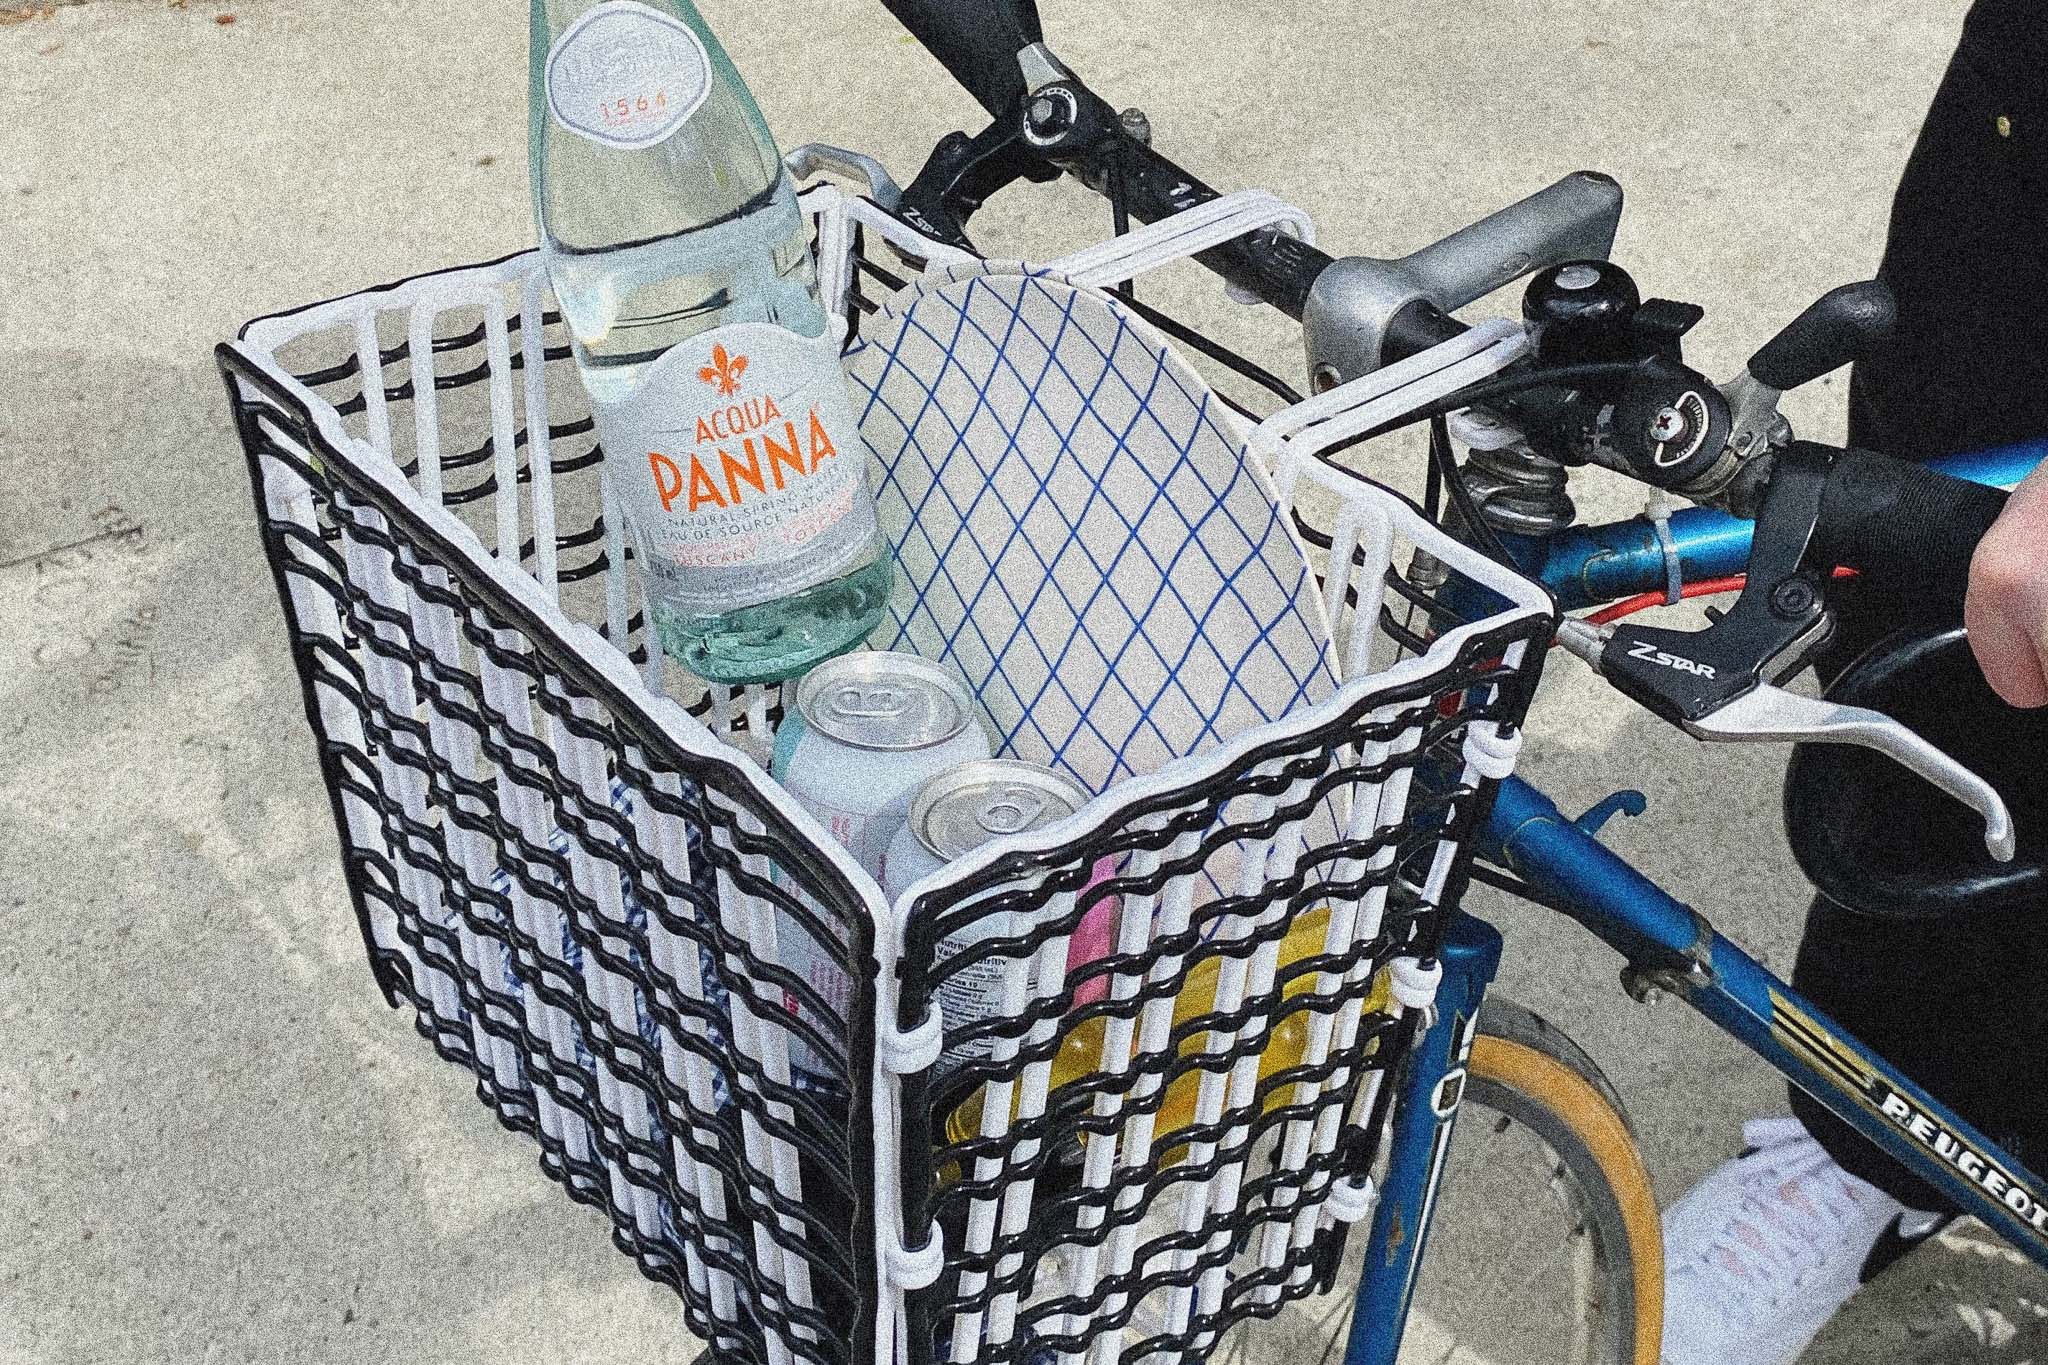 A close-up image of front bike basket on a bike. The basket is woven black and white plastic, resembling a textile. There are beverages and a paper plate inside the basket.